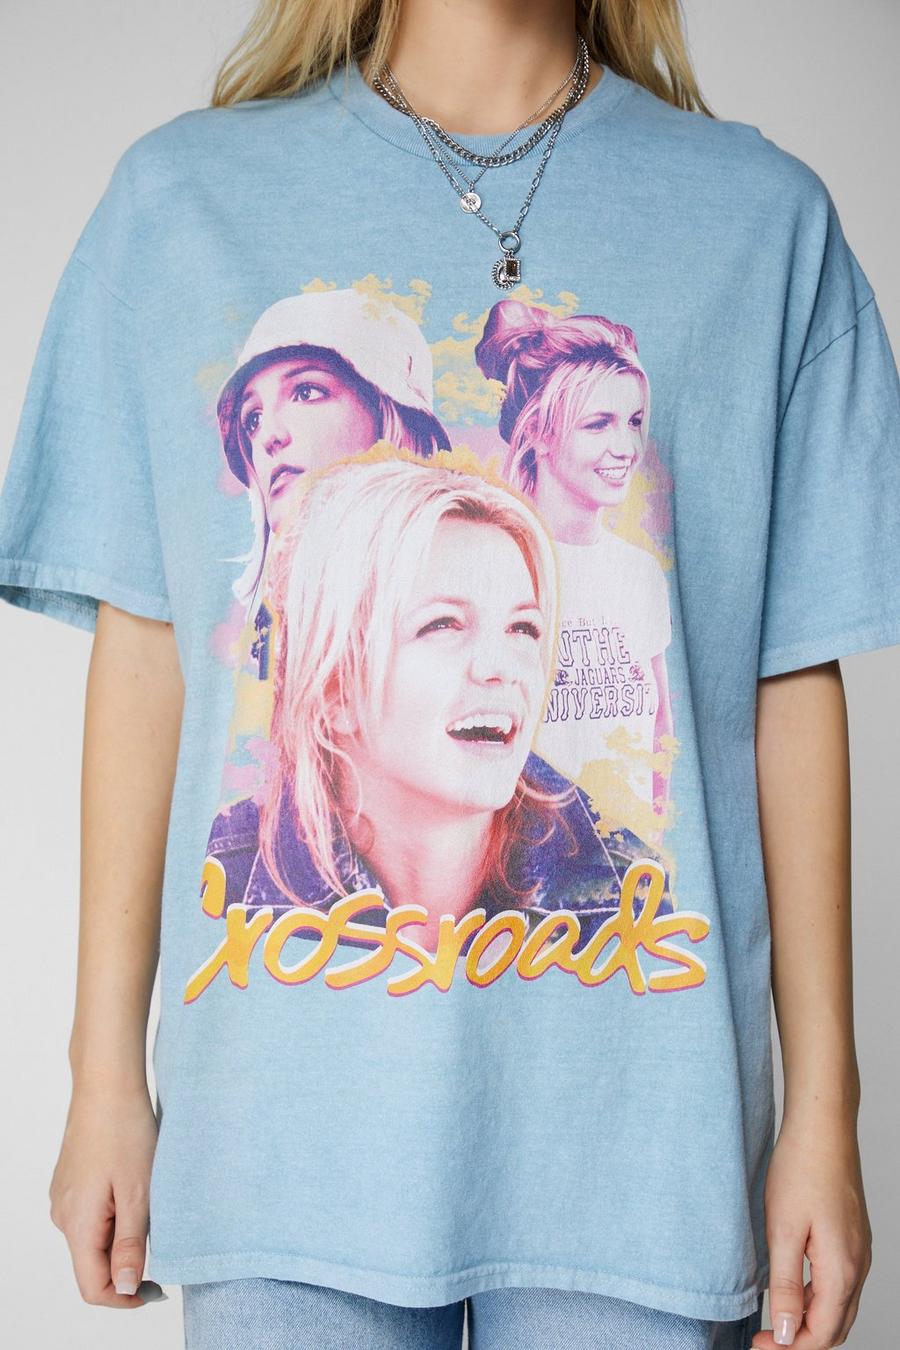 Blue Britney Spears Crossroads Oversized Graphic T-shirt